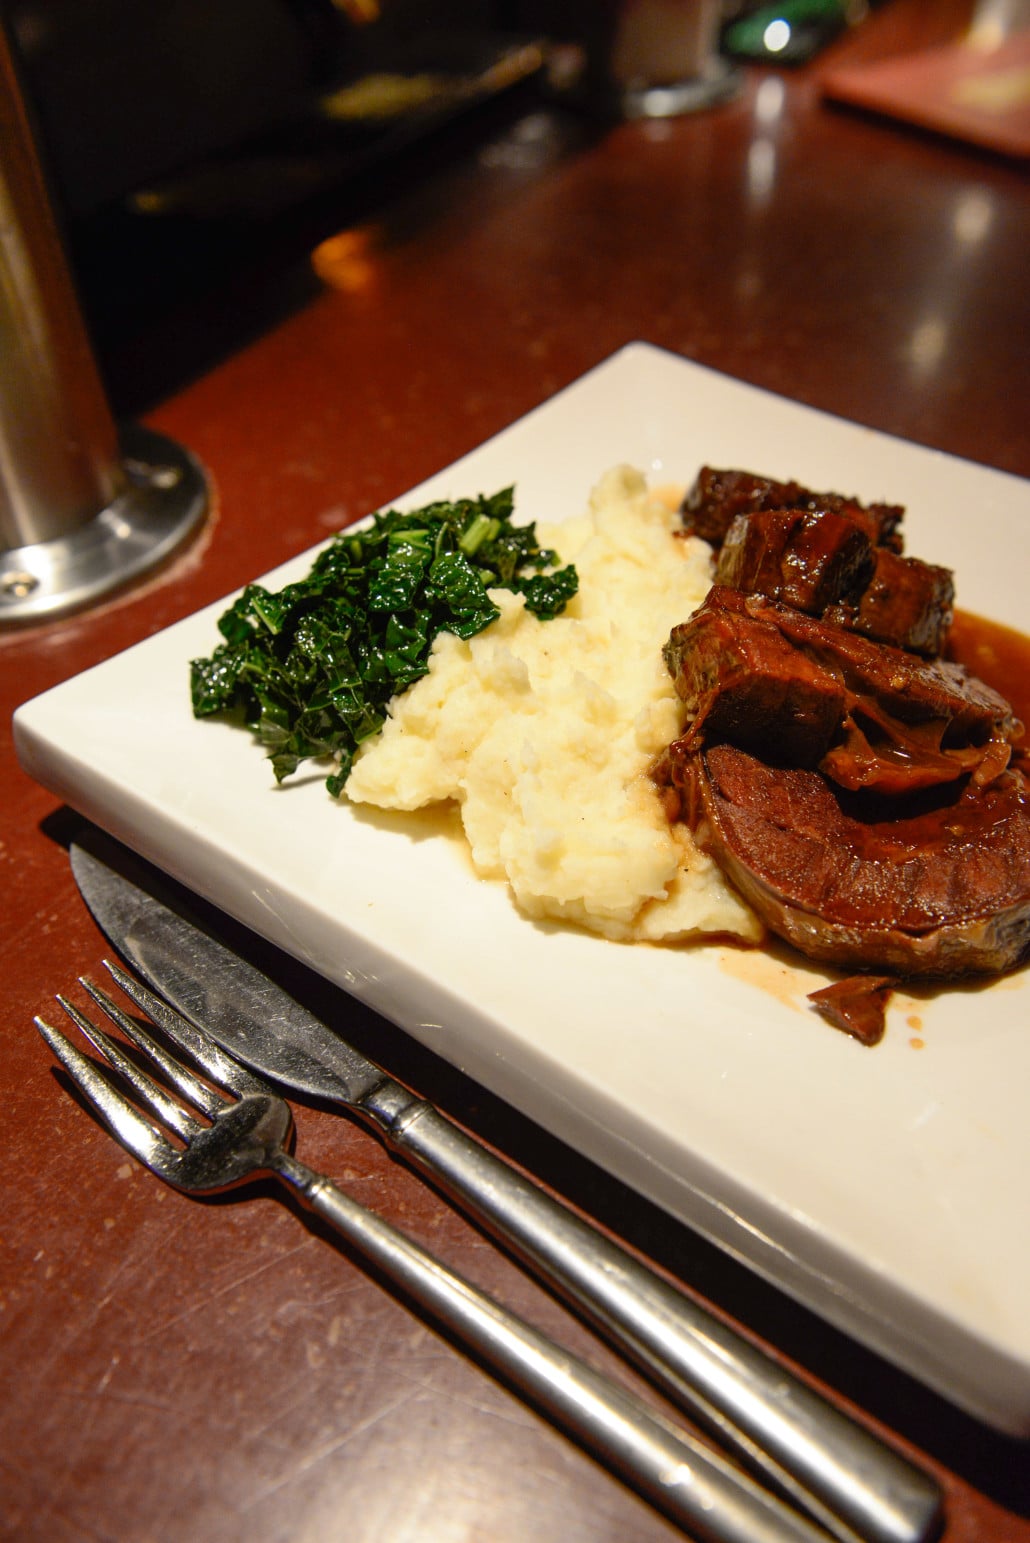 Sir William Farm Brown Ale-braised beef shank with mashed potatoes at Bywater Bistro in Rosendale, NY